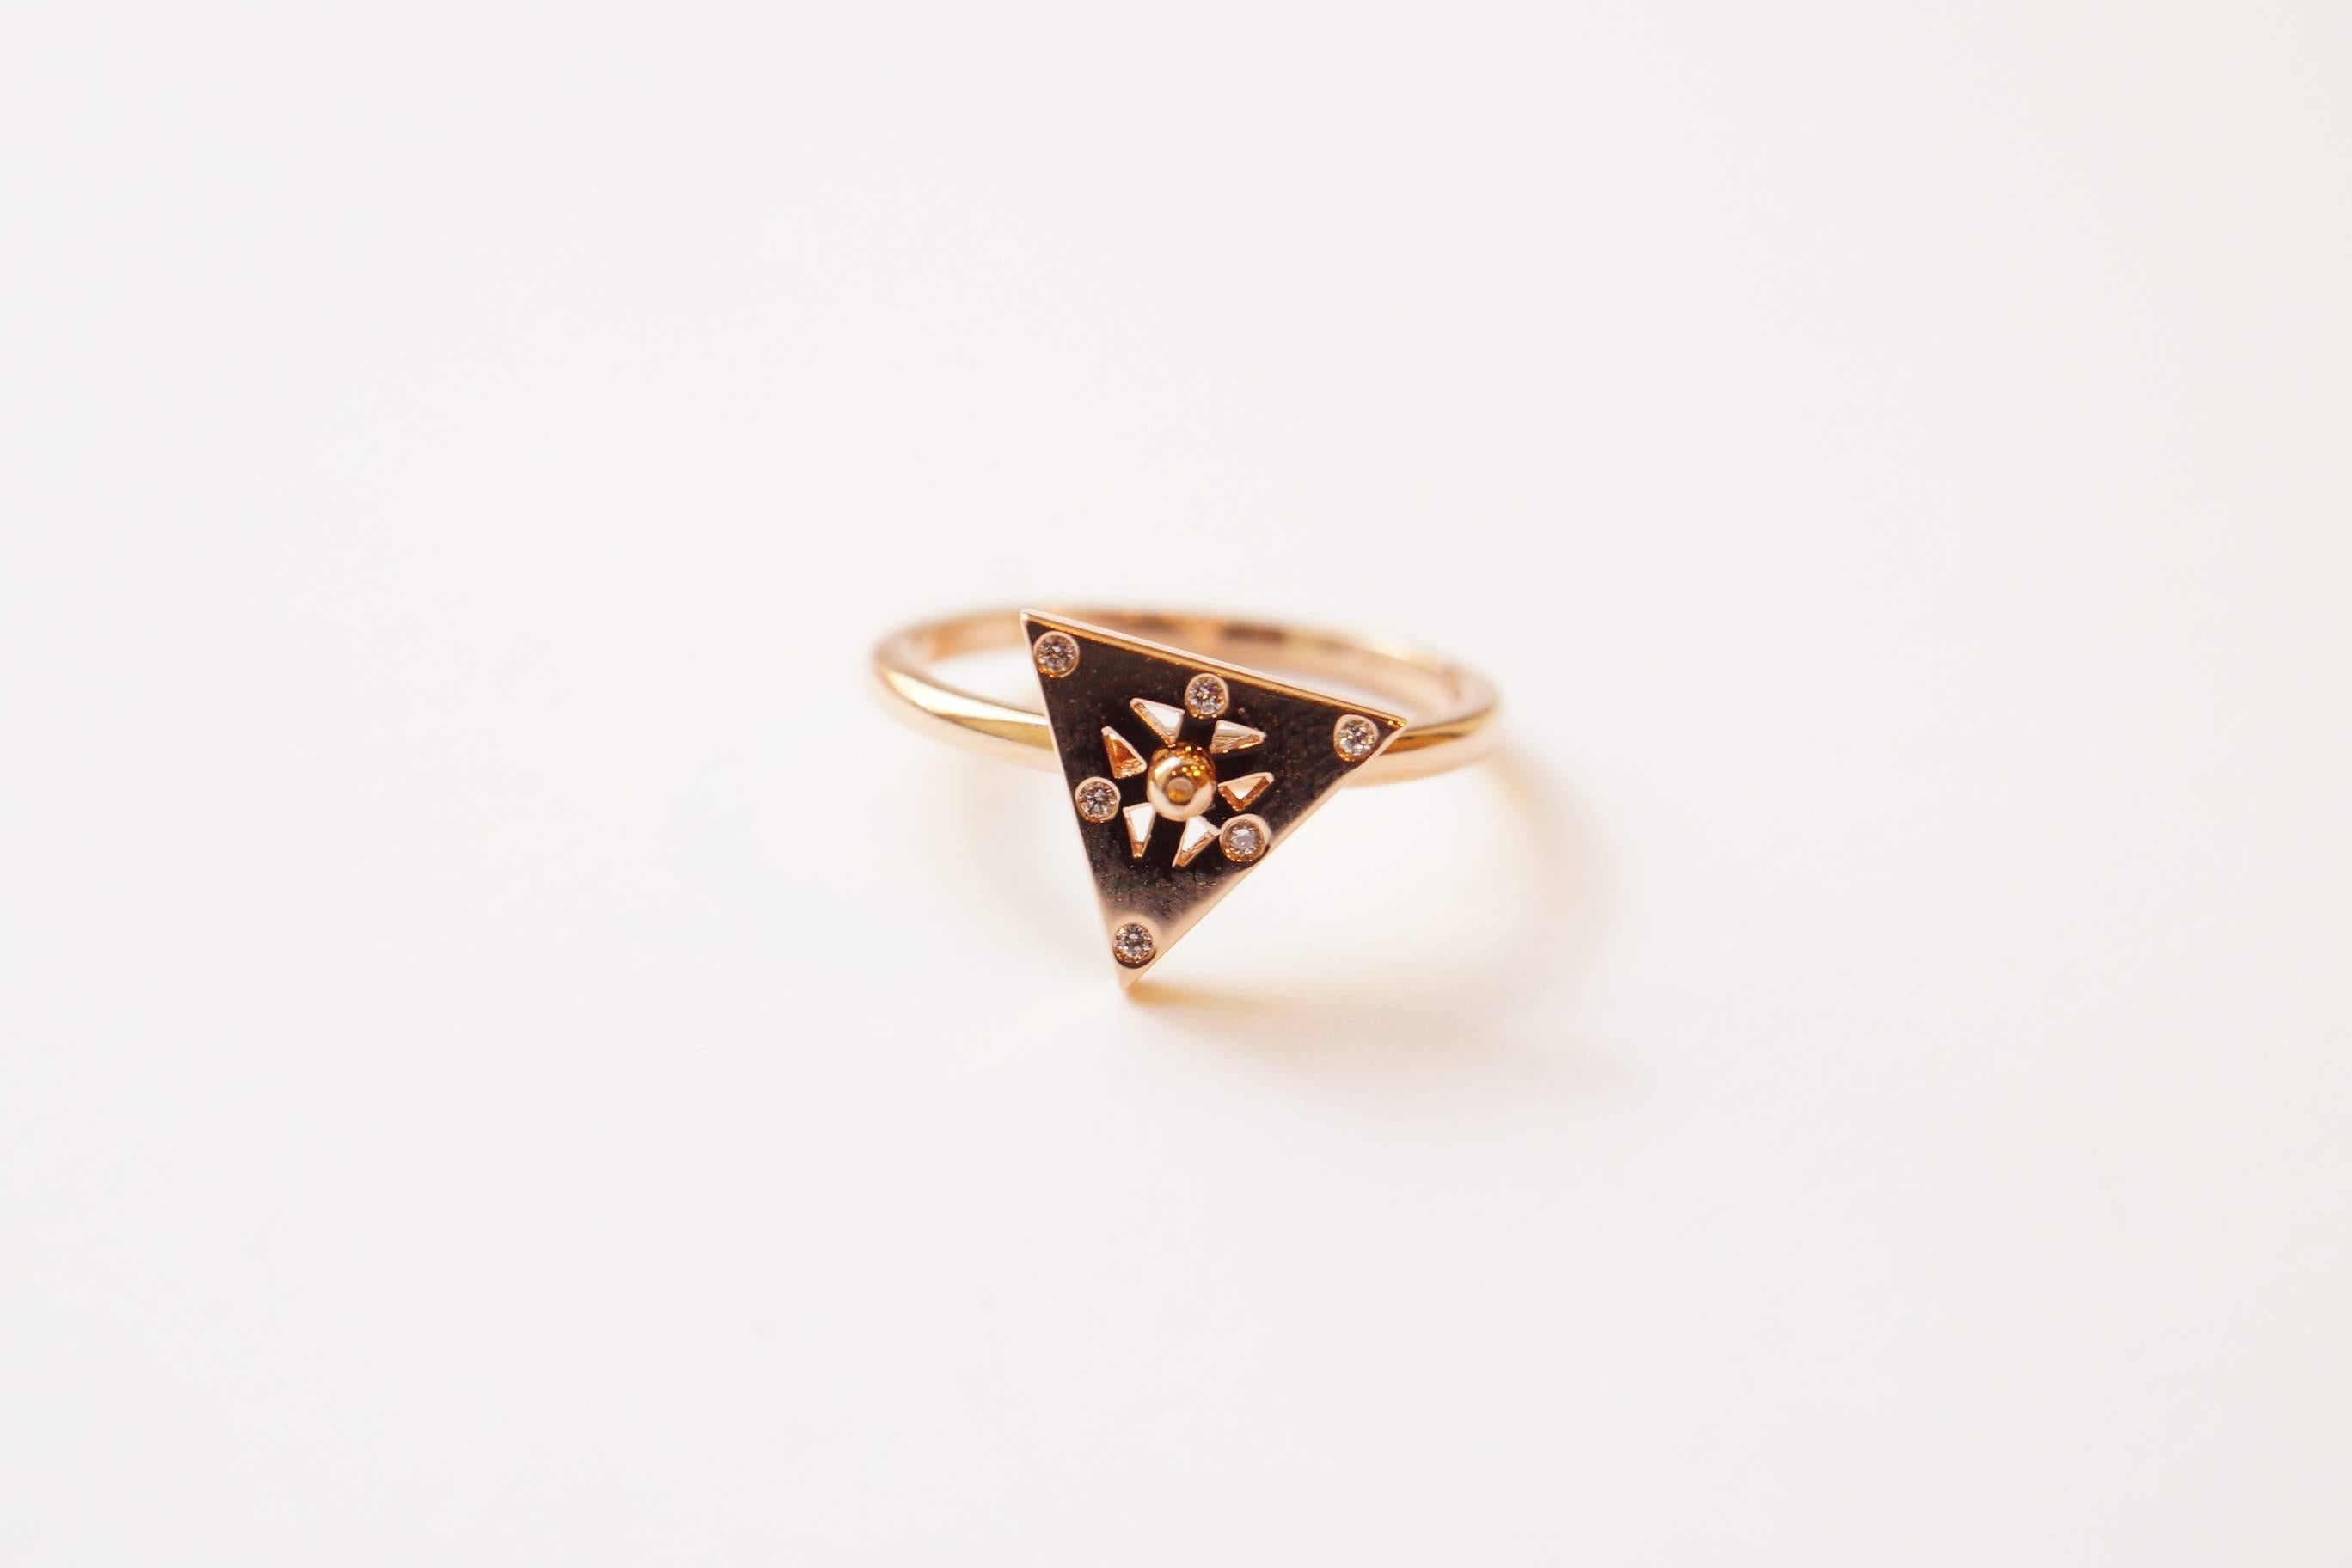 Billy Collection - Triangular Axle Ring
A triangular eighteen-karat rose gold ring with the ability to spin on an axle.  Each spoke has been set with a single white diamond, as has the center of the triangle.  
Size 6 - adjustable upon request
This